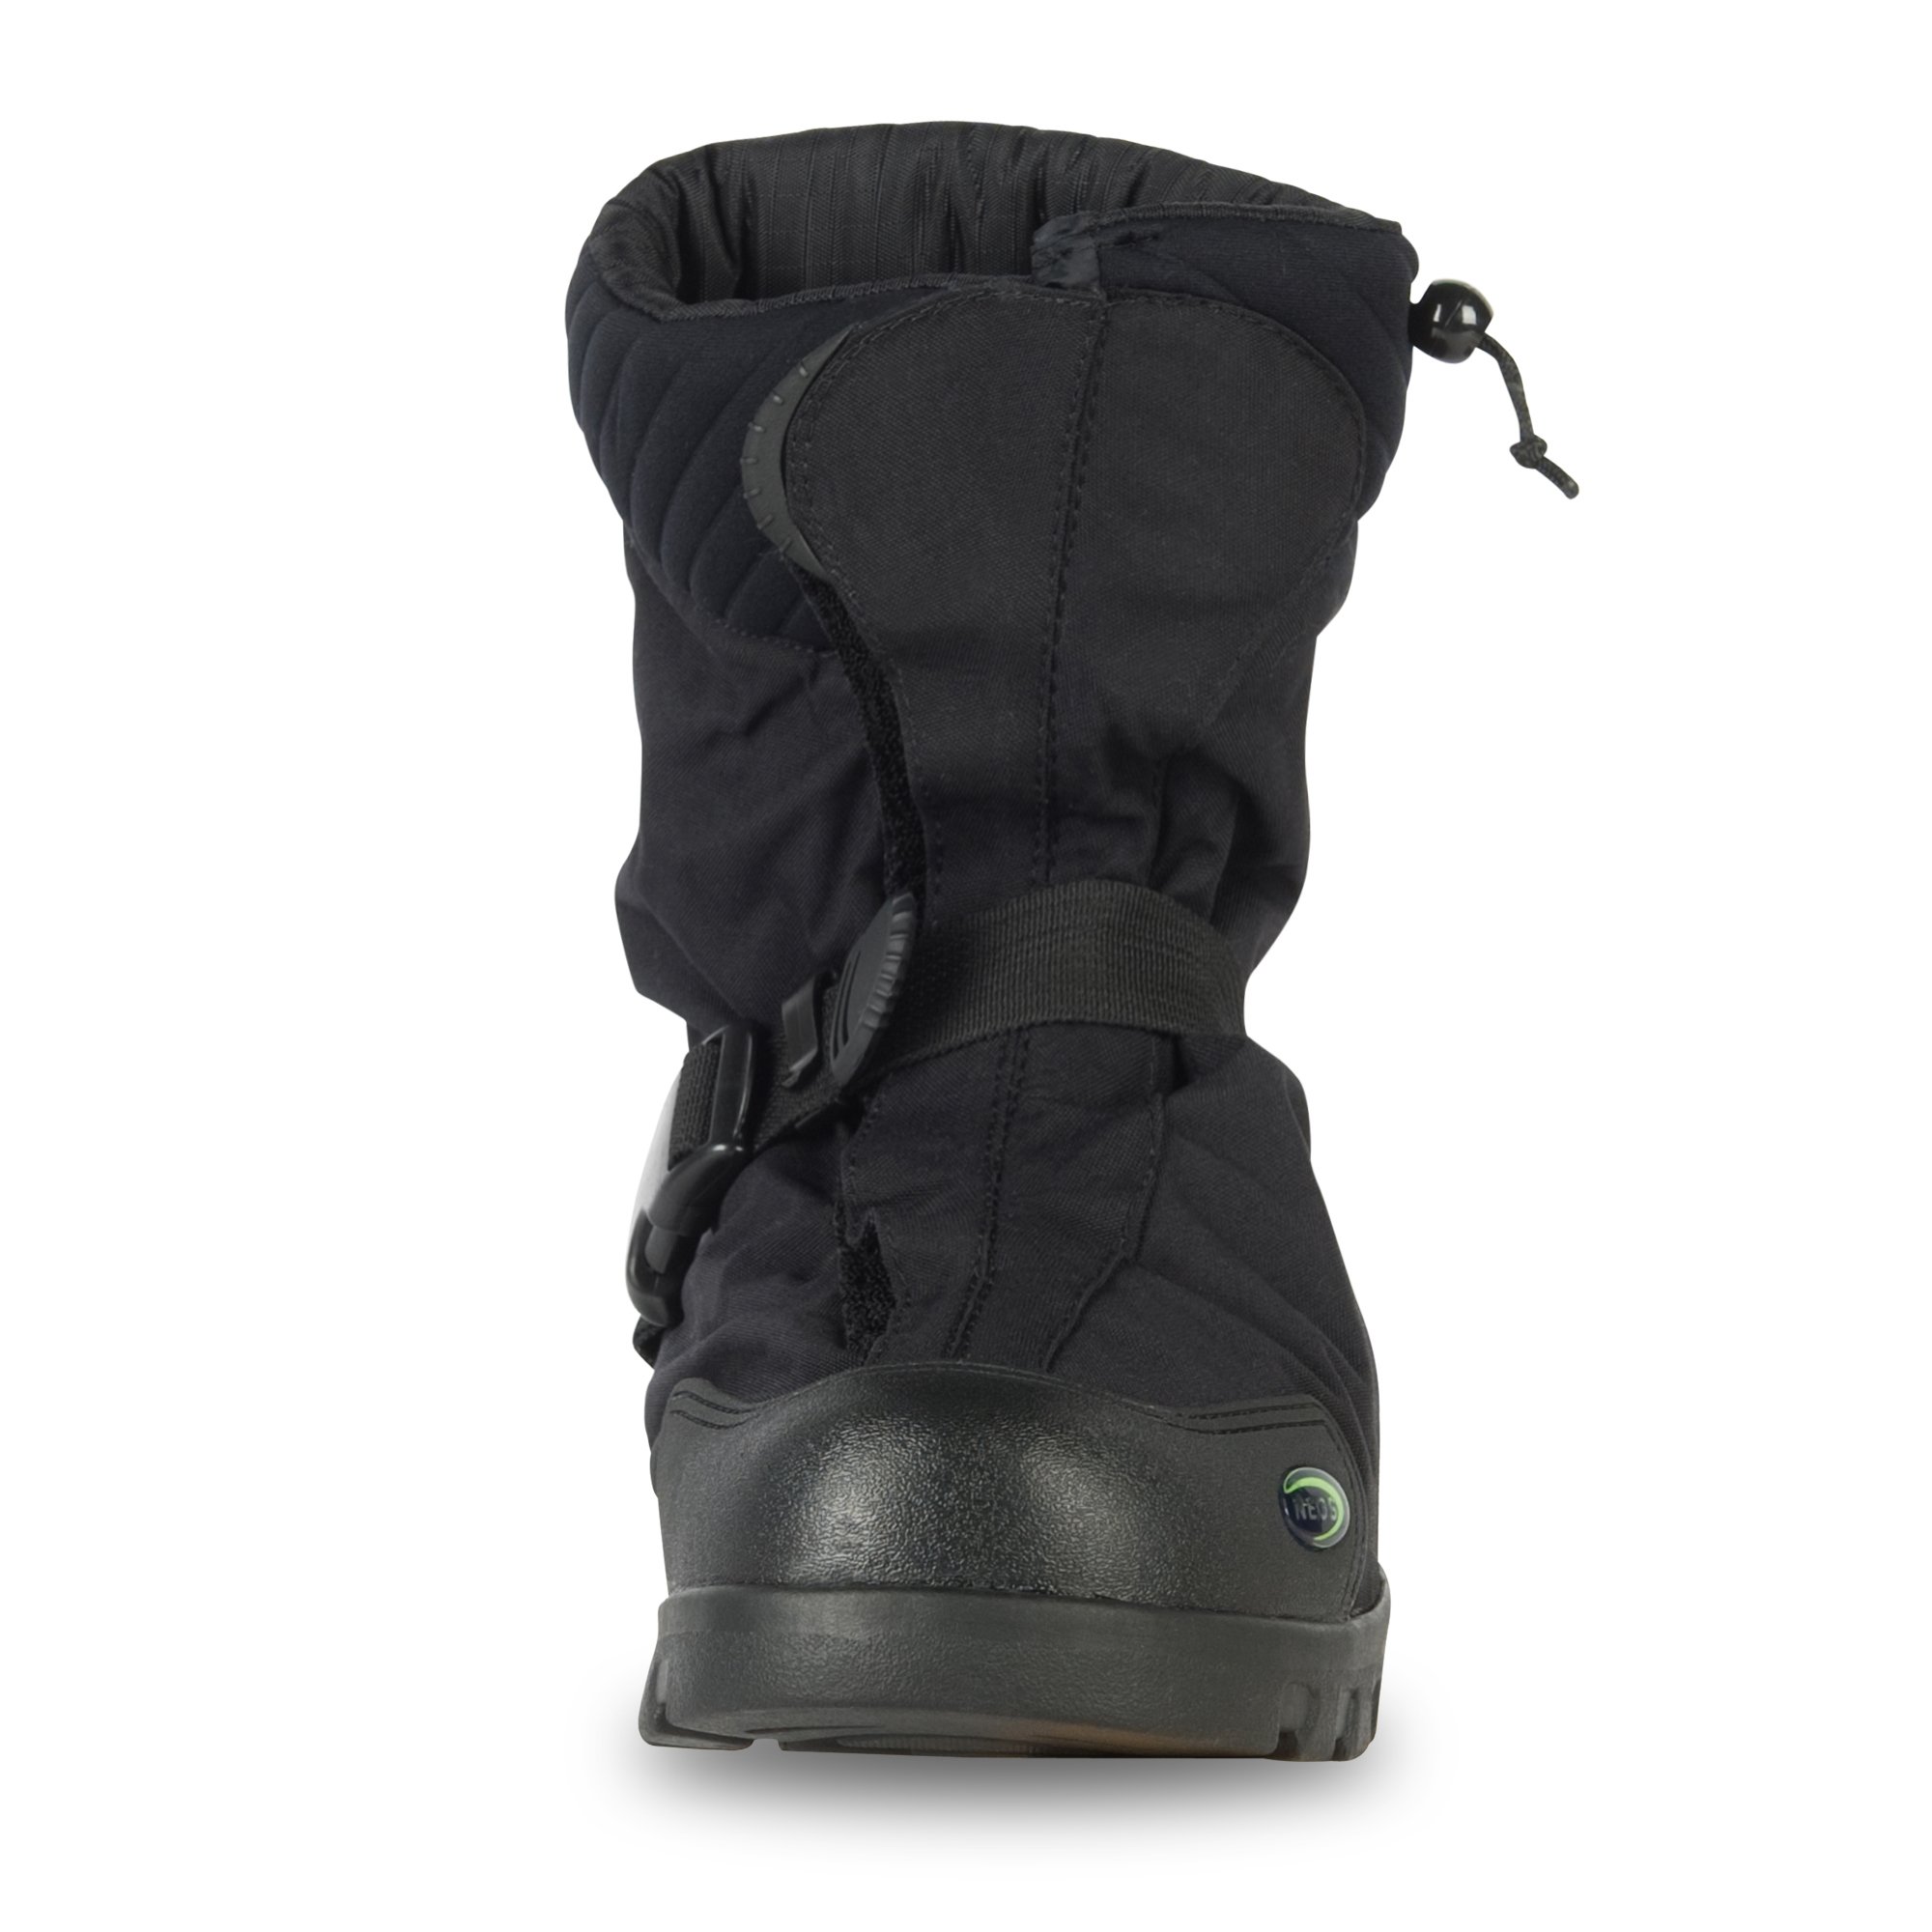 NEOS Explorer Slip Resistant Overshoes with Outsole (EXSG)